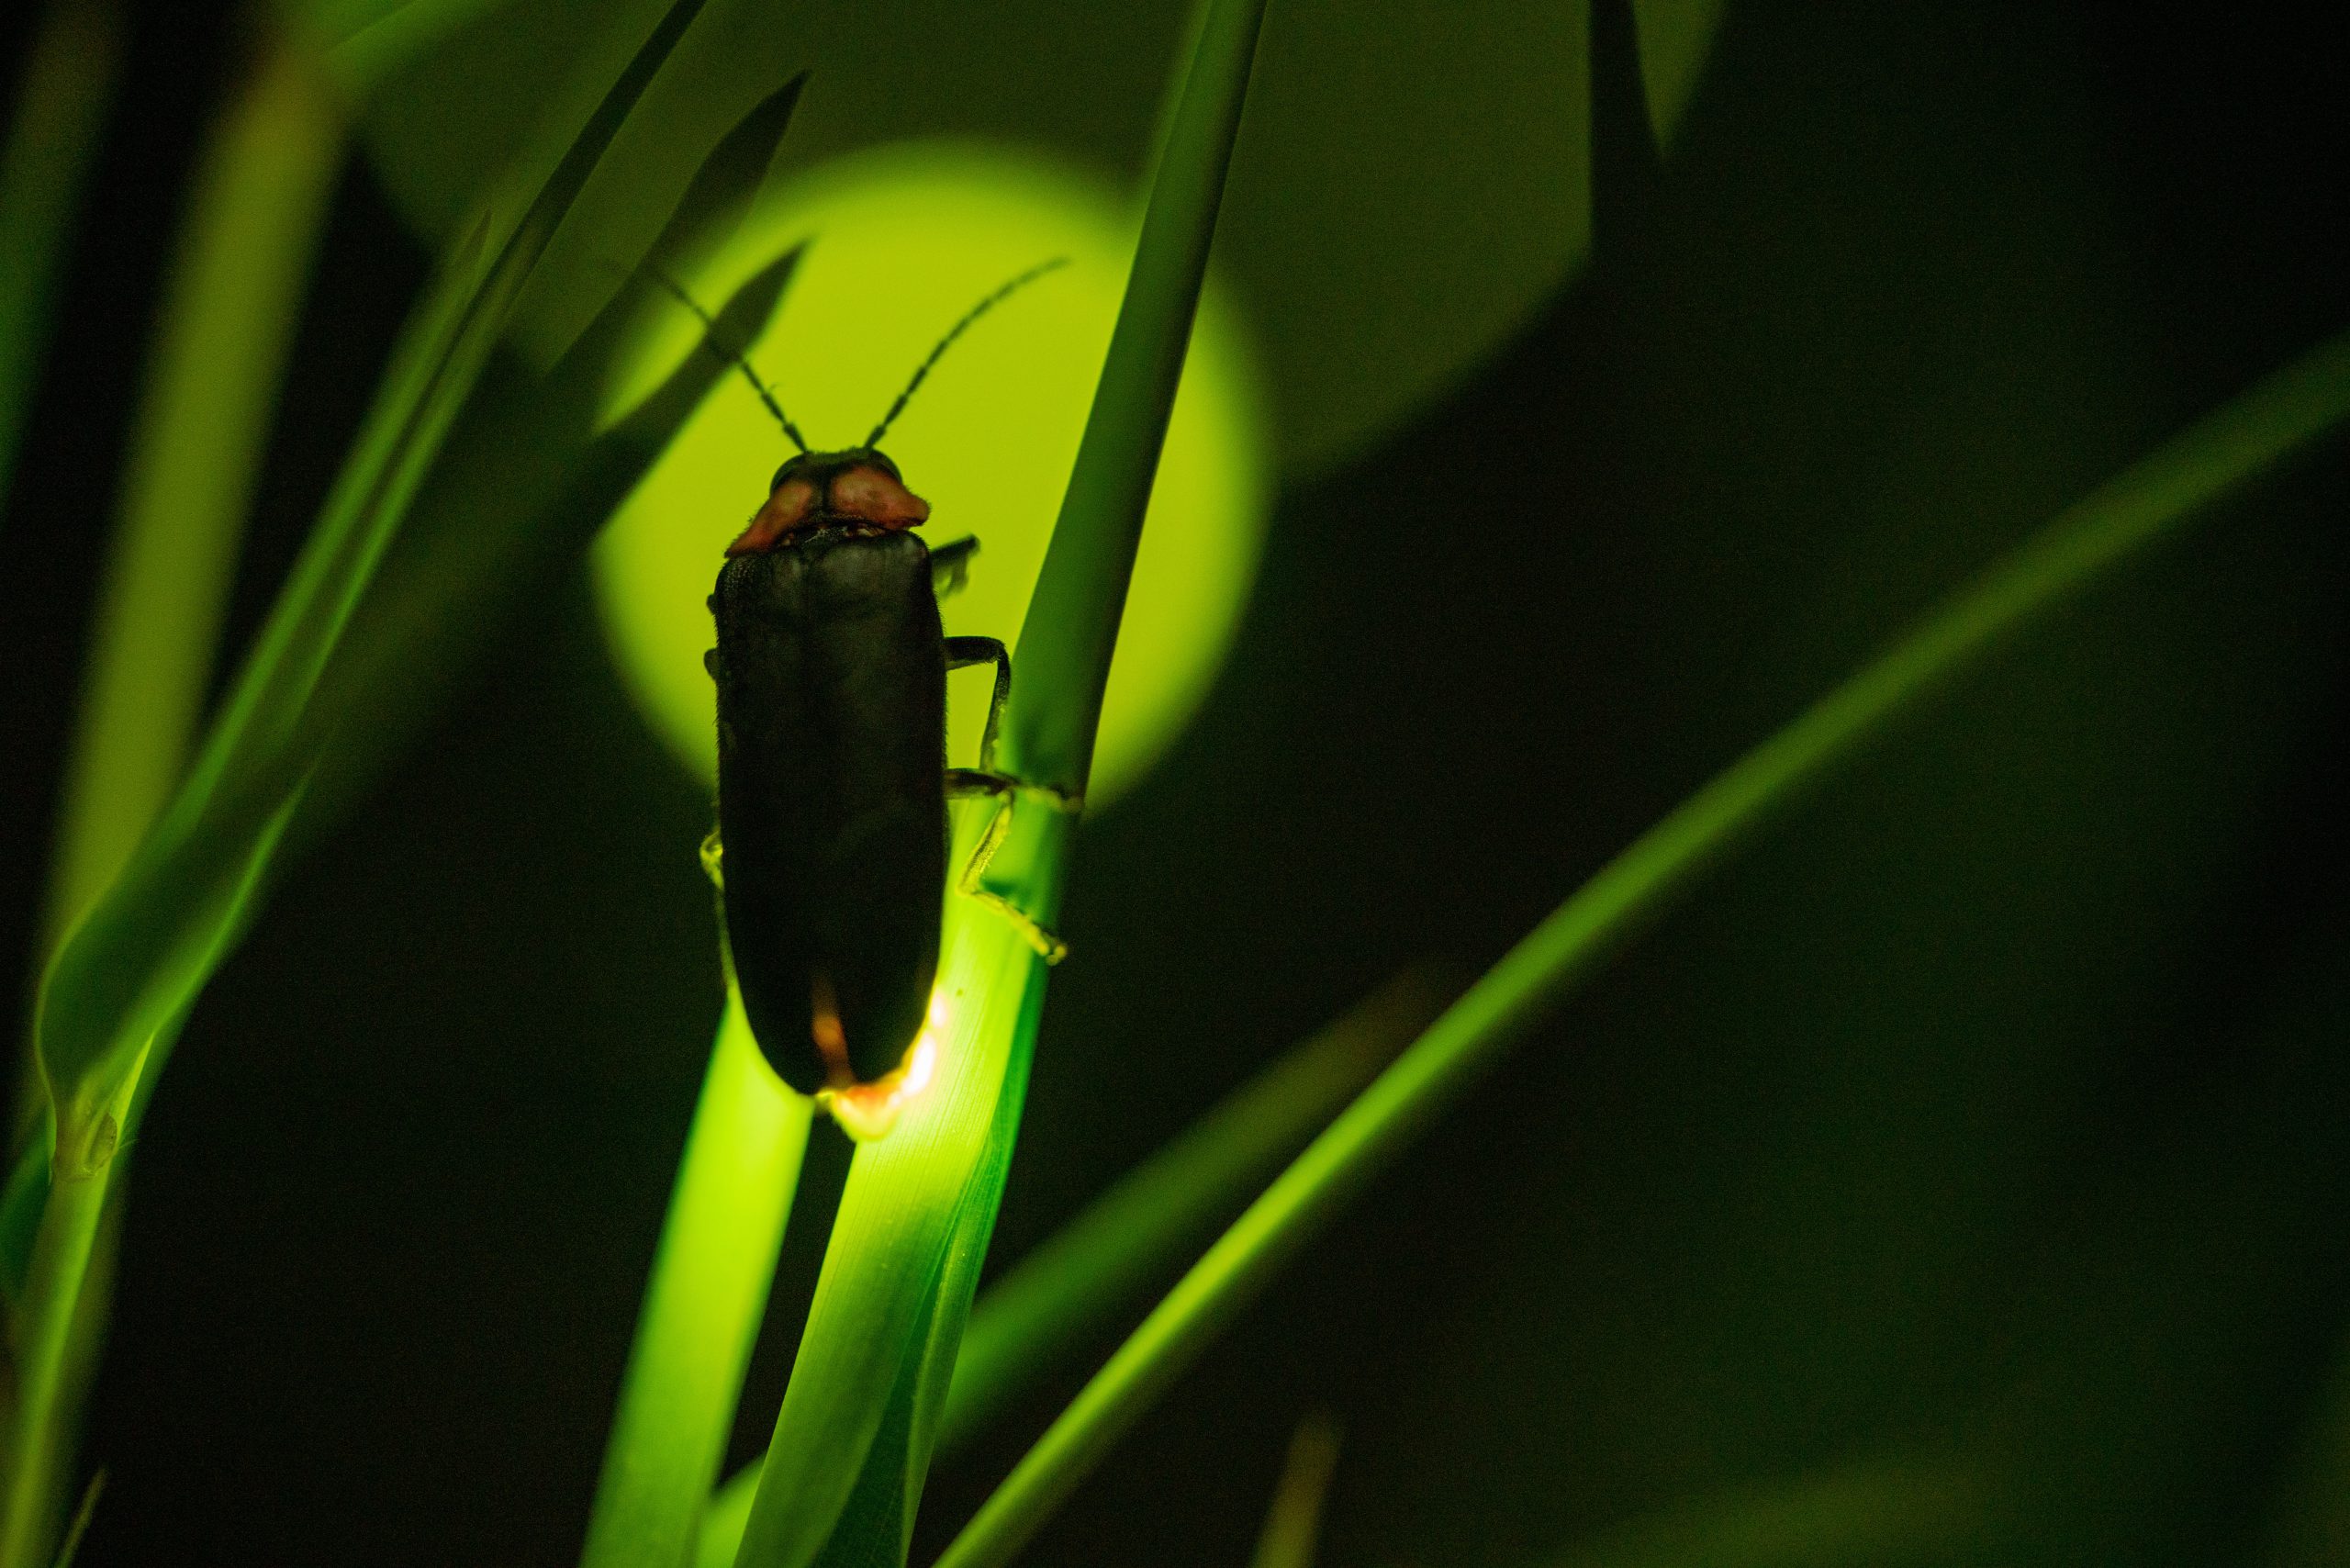 Firefly on a blade of grass